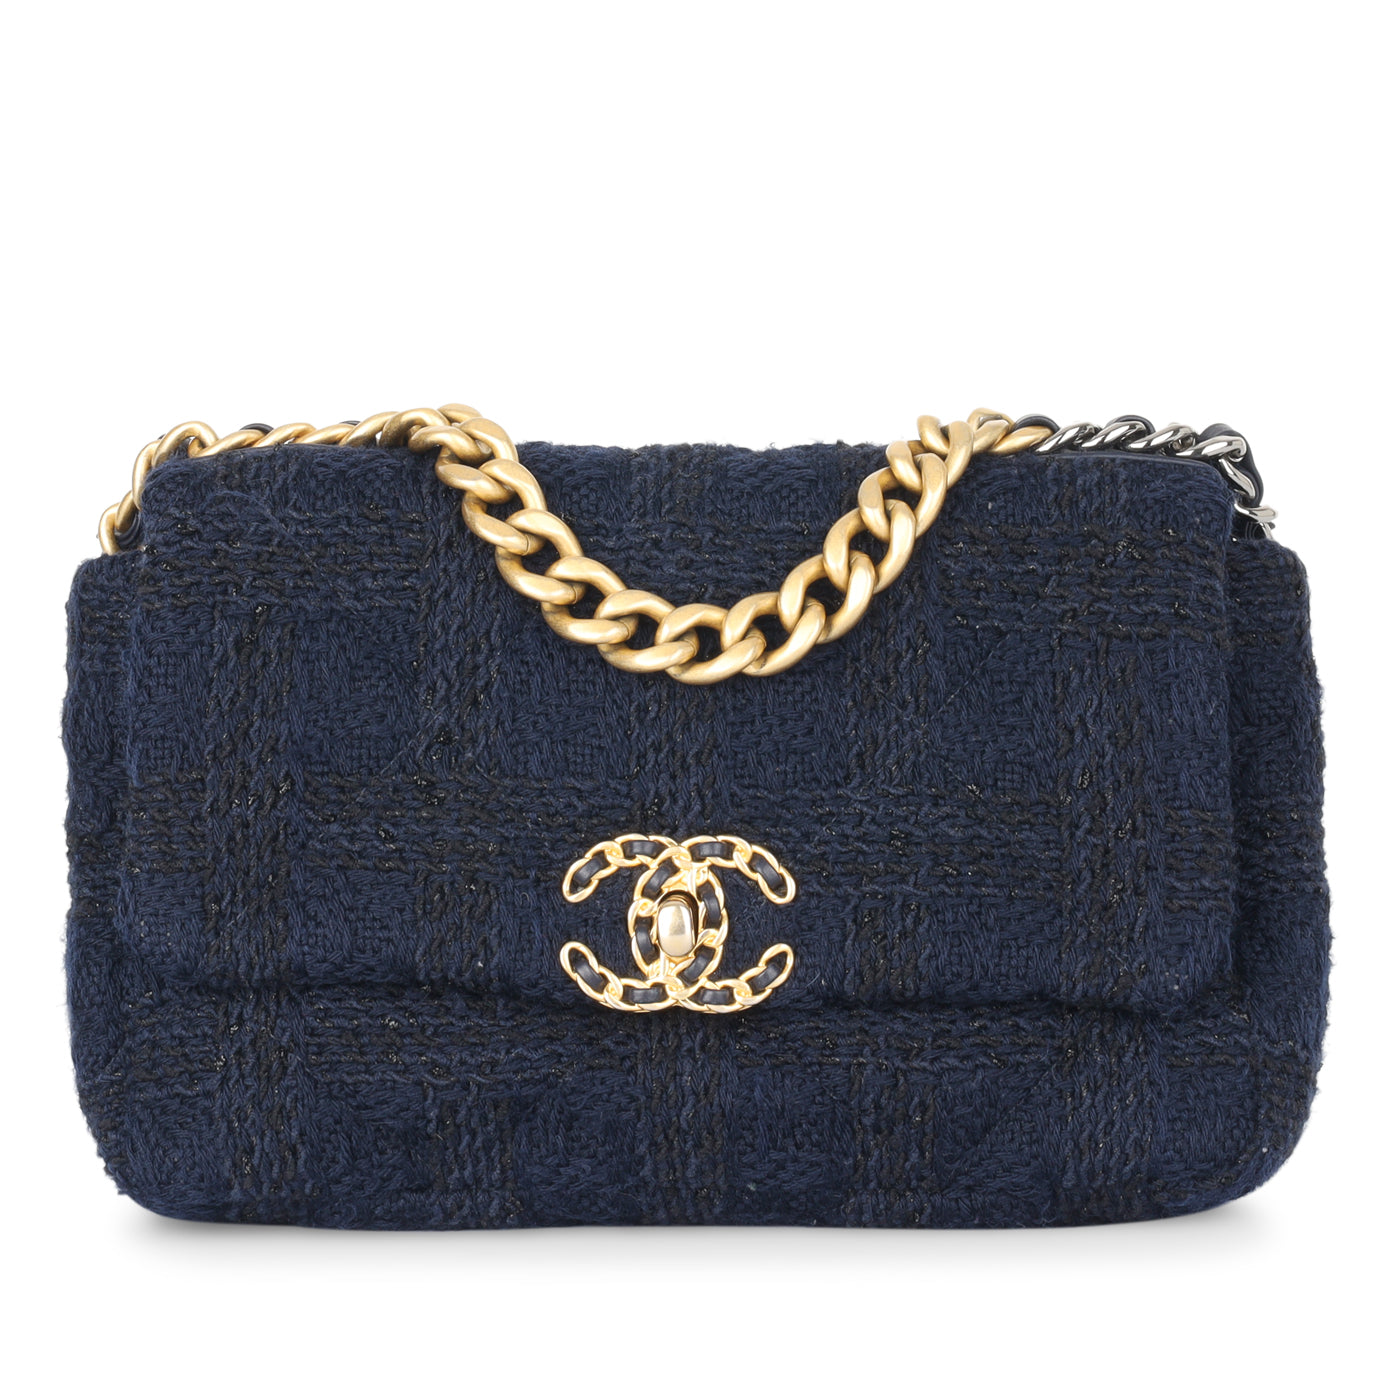 Chanel Navy Tweed 19 Bag Tuckernuck Archive Collection